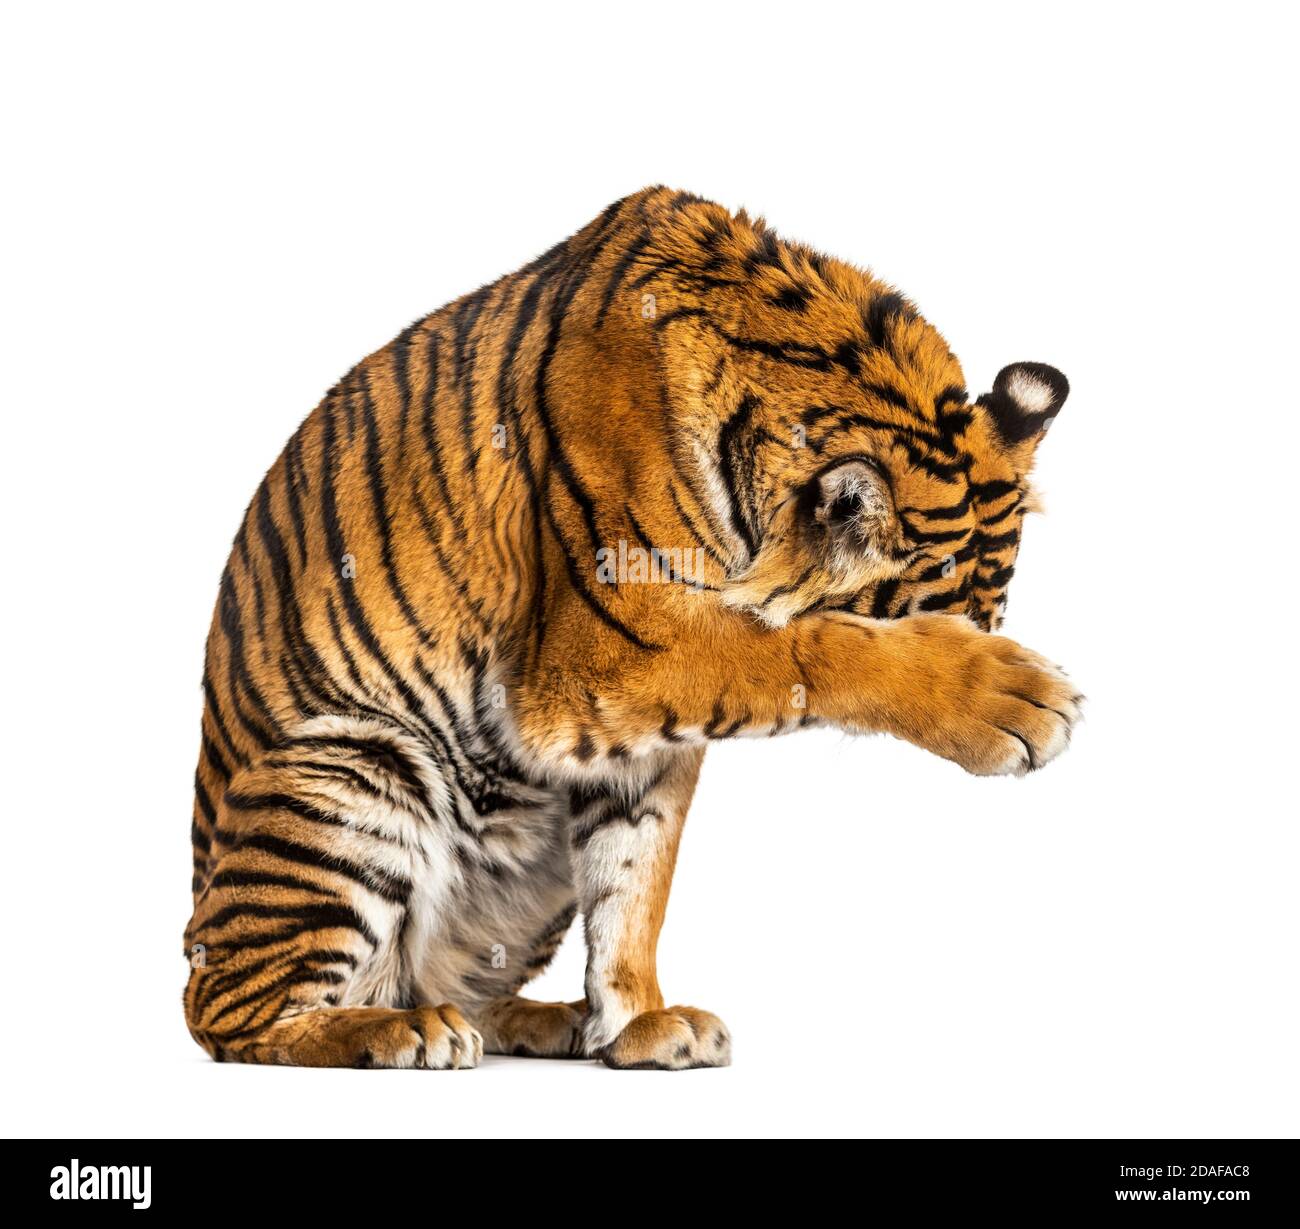 shy Tiger hiding itself behing its paw Stock Photo